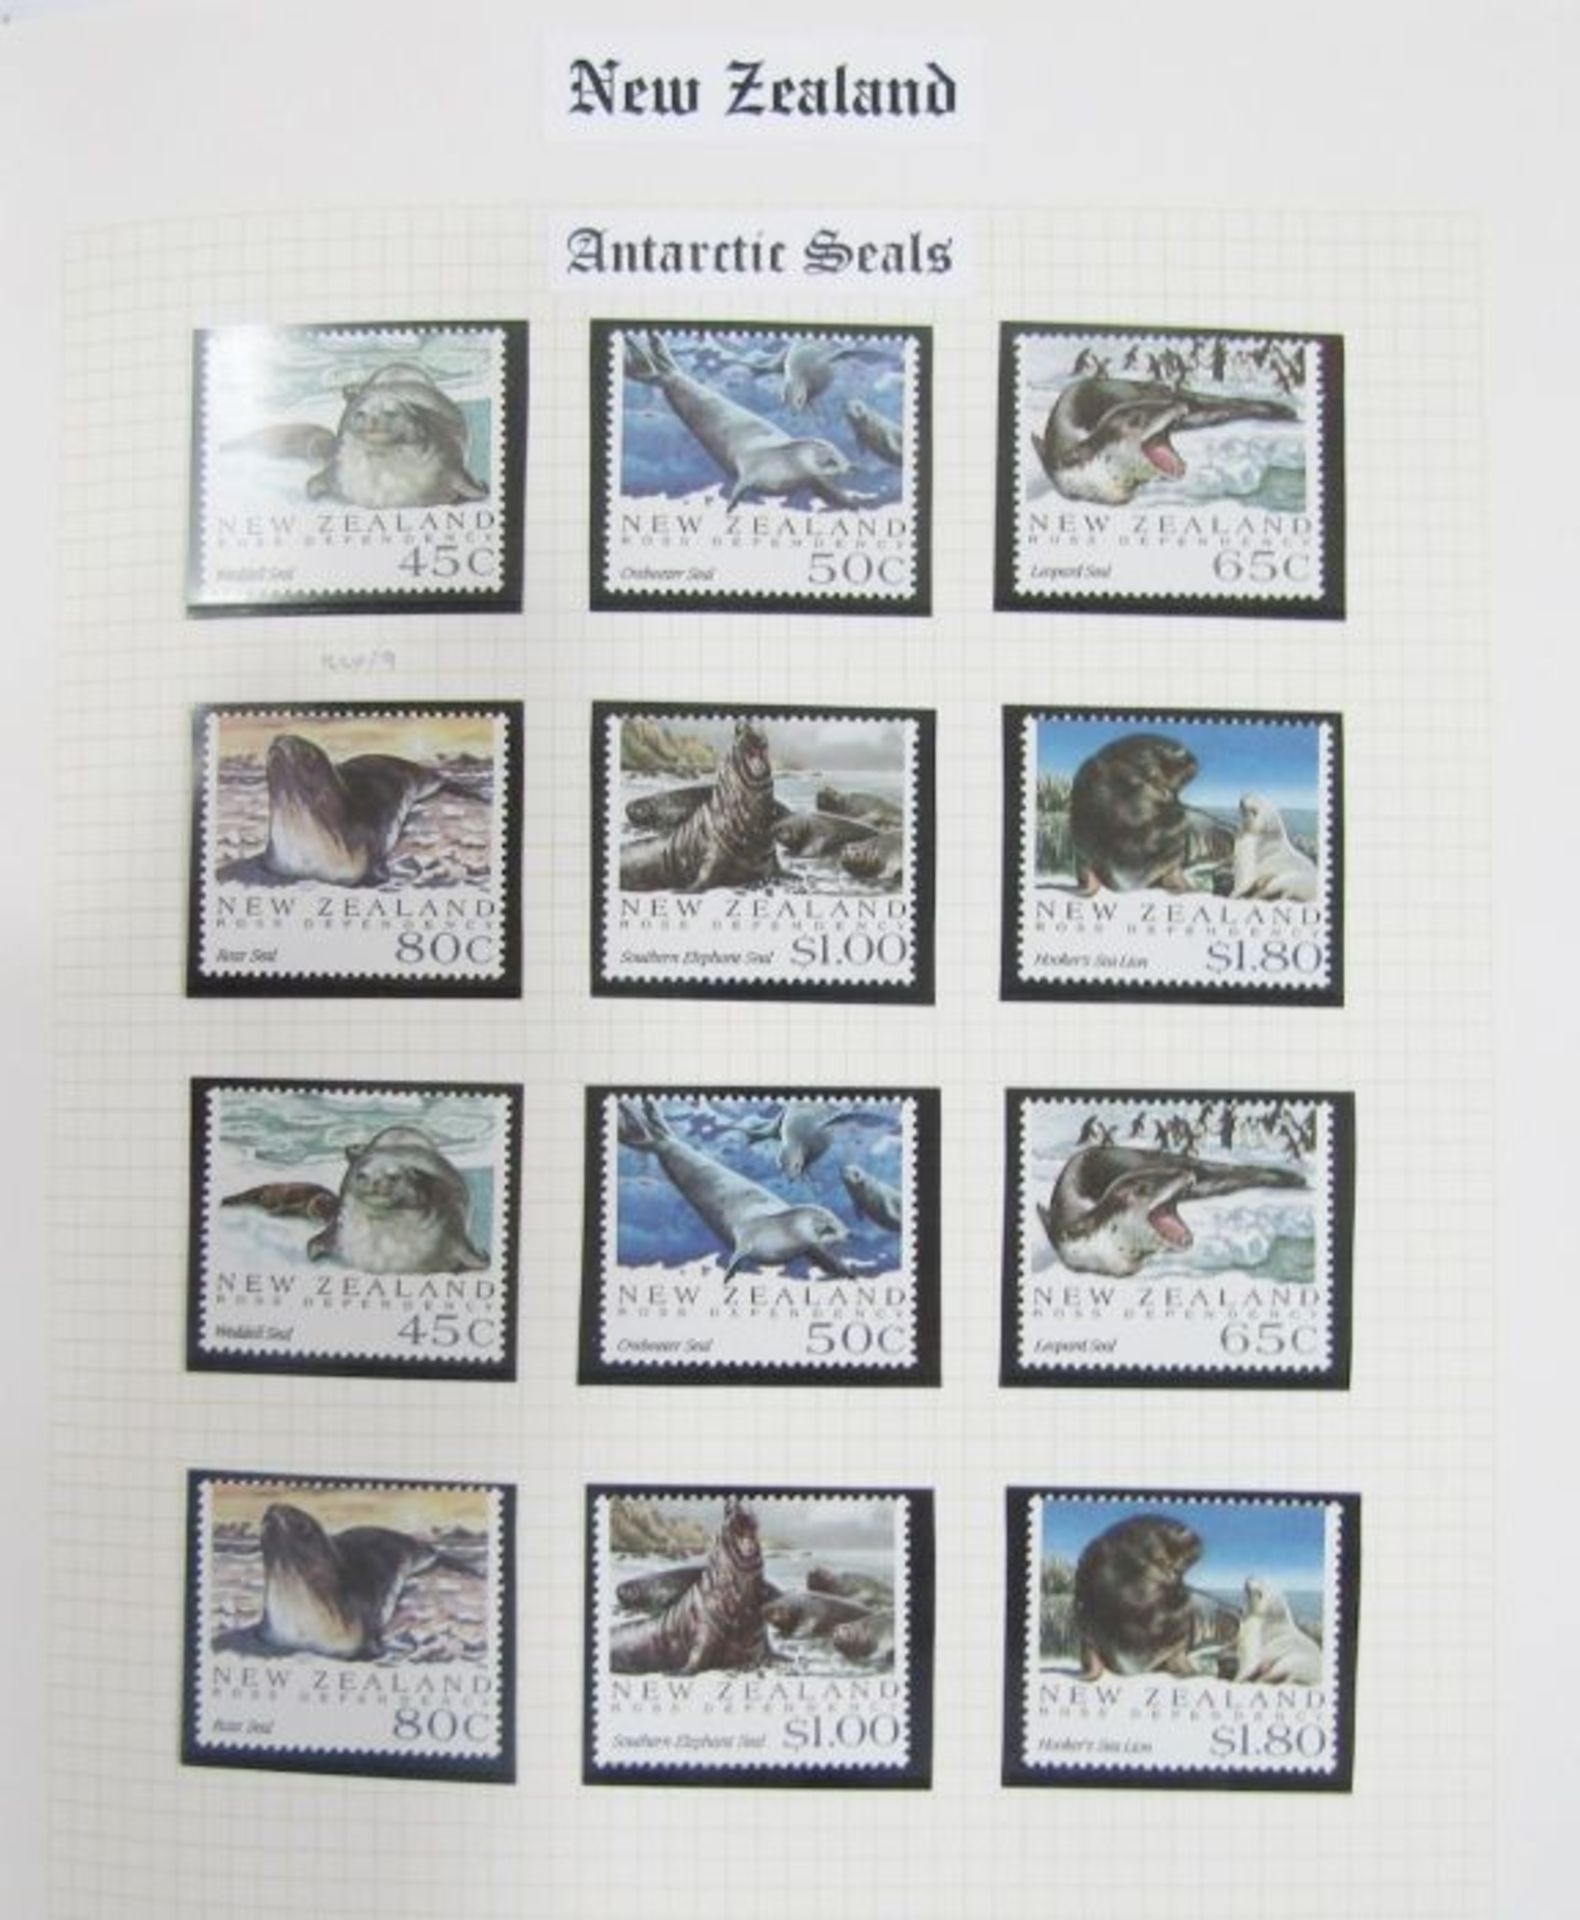 New Zealand: 3 large albums and stock book of mint/used definitives and commemoratives, QV to QEII - Image 27 of 27